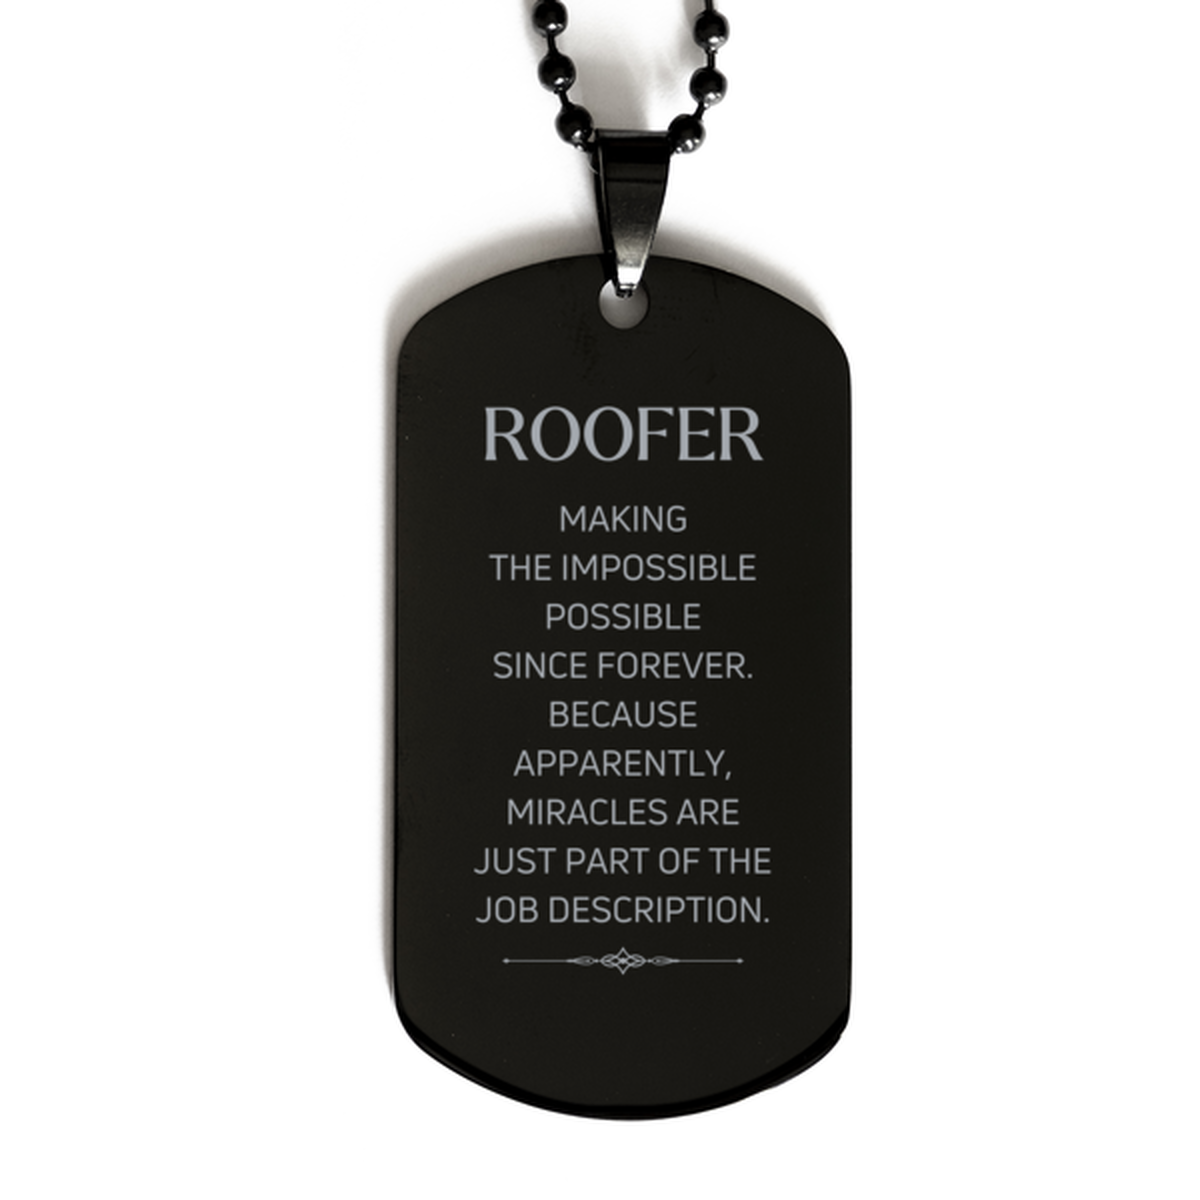 Funny Roofer Gifts, Miracles are just part of the job description, Inspirational Birthday Black Dog Tag For Roofer, Men, Women, Coworkers, Friends, Boss